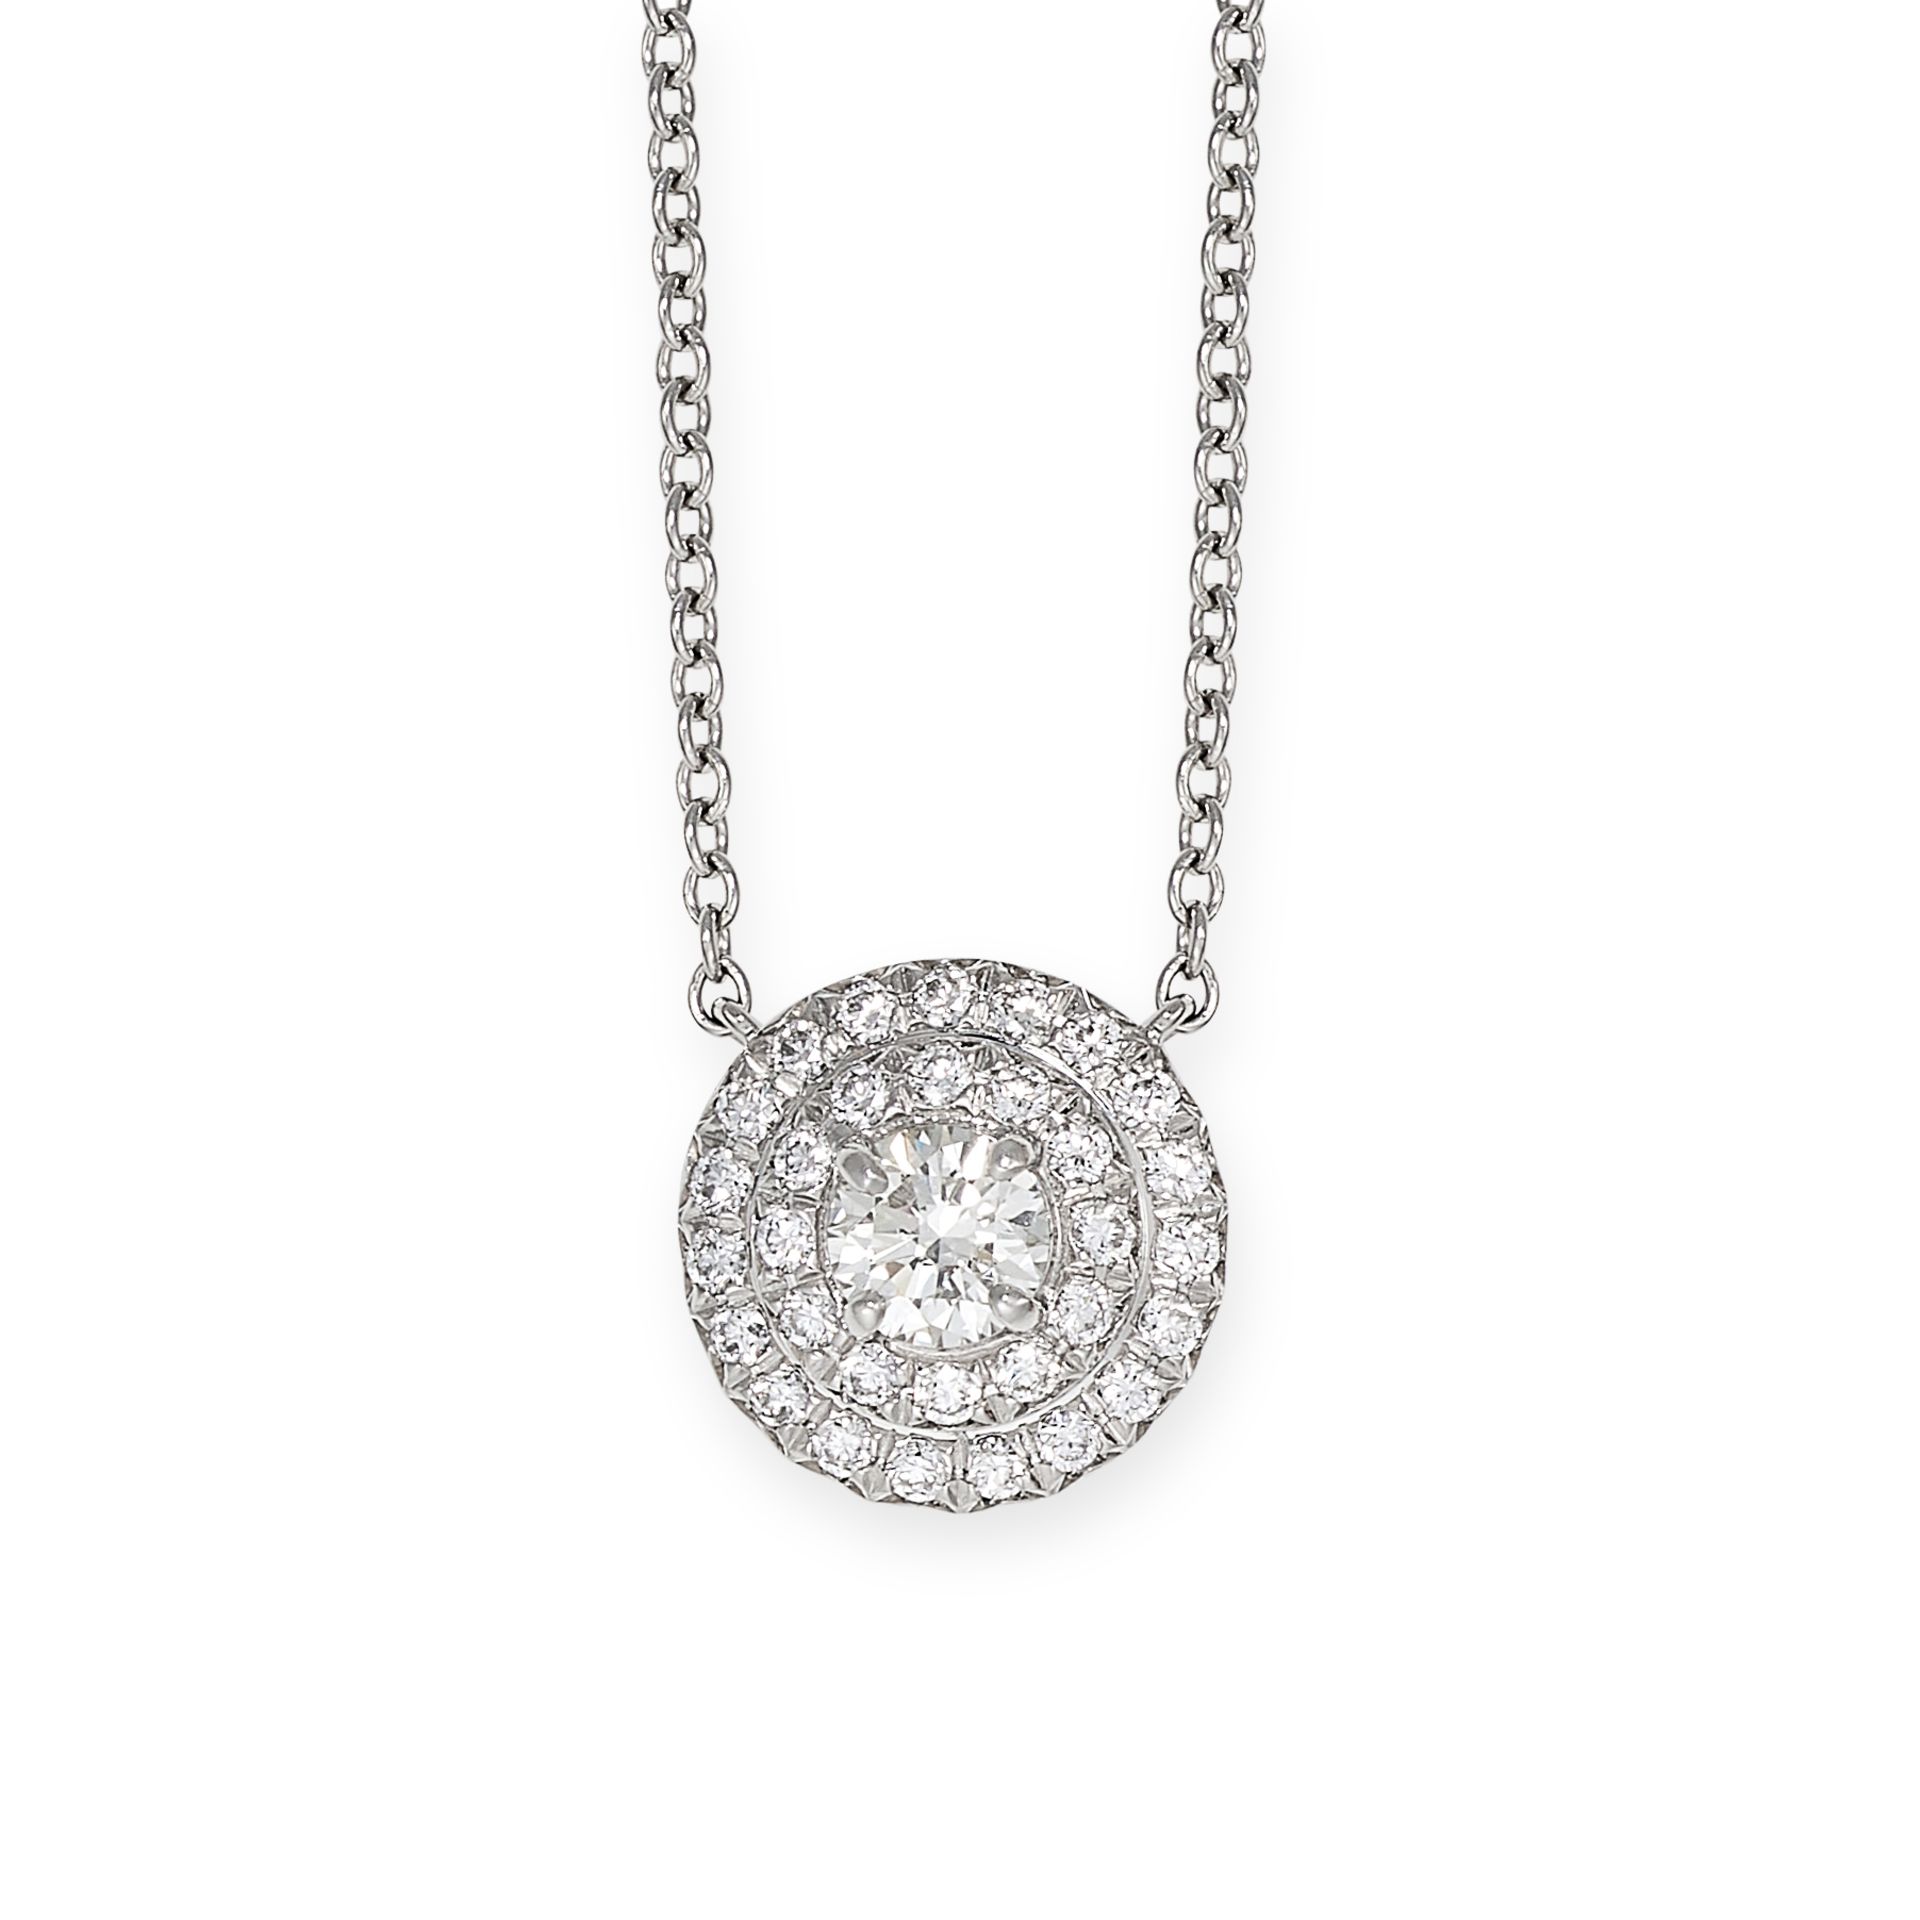 TIFFANY & CO, A DIAMOND SOLESTE PENDANT NECKLACE in platinum, the circular pendant set with a rou...